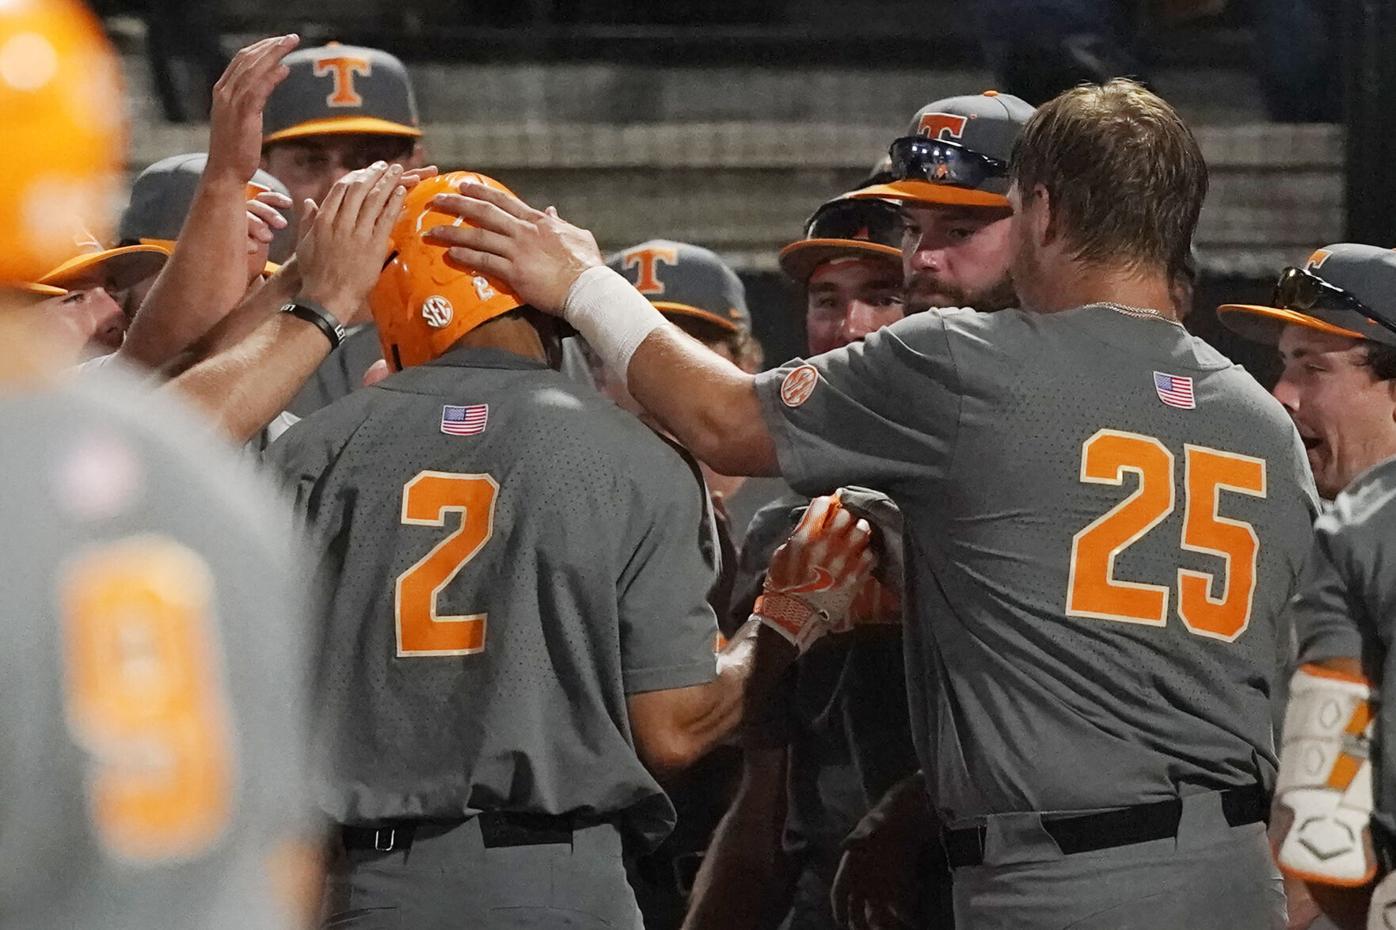 Tennessee baseball earns first CWS win since 2001